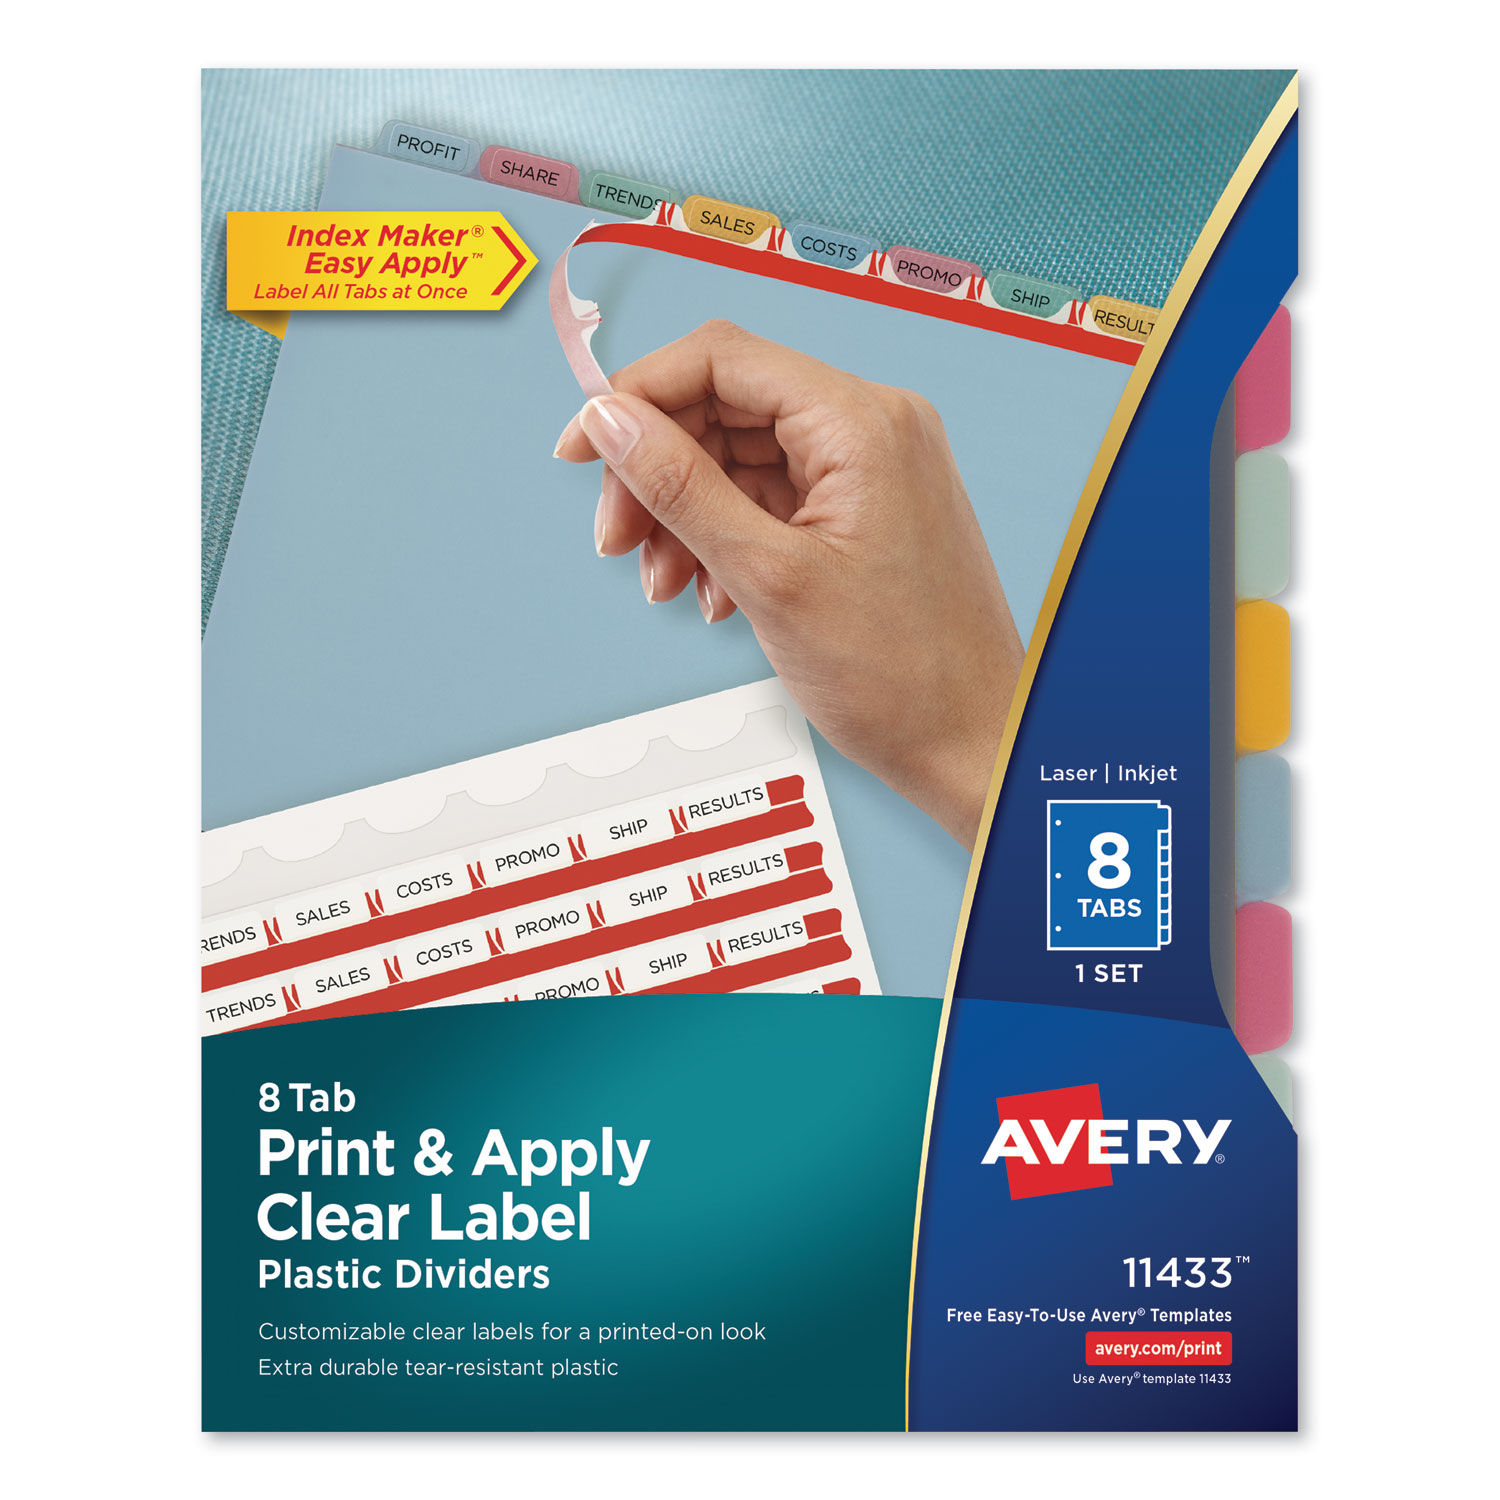 Print and Apply Index Maker Clear Label Plastic Dividers with Printable Label Strip 8-Tab, 11 x 8.5, Assorted Tabs, 1 Set